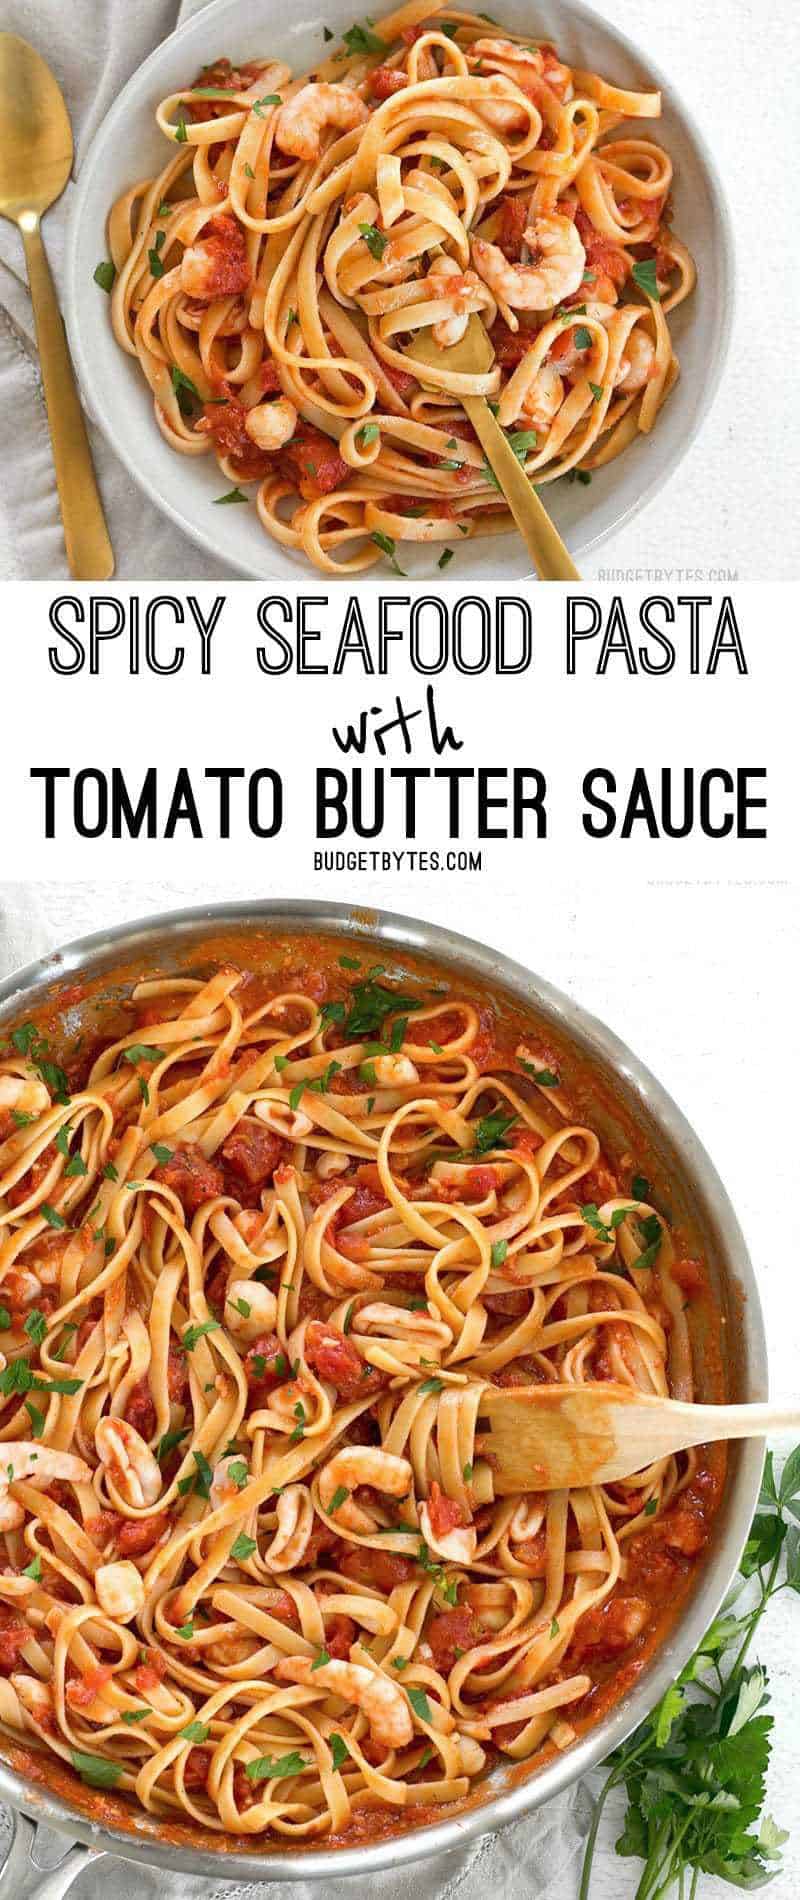 Spicy Seafood Pasta with Tomato Butter Sauce is a simple go-to weeknight dinner that can be made with pantry staples. BudgetBytes.com